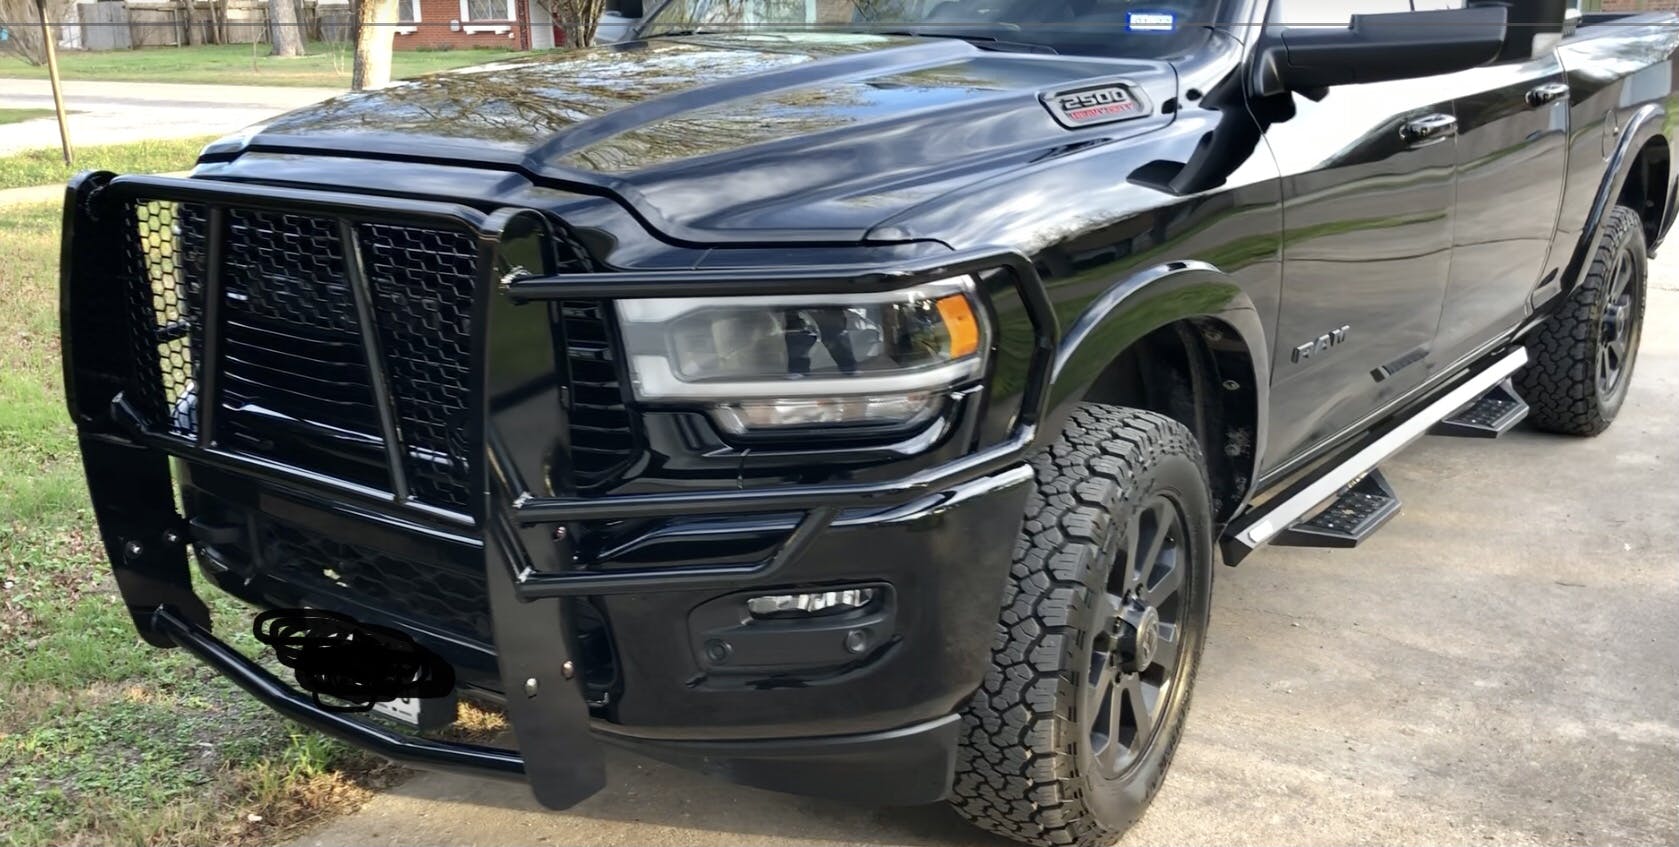 Ranch Hand GGD191BL1C Legend Dodge Ram 2500/3500 Grille Guard 2019-2021 Best Grill Guard For Ram 3500